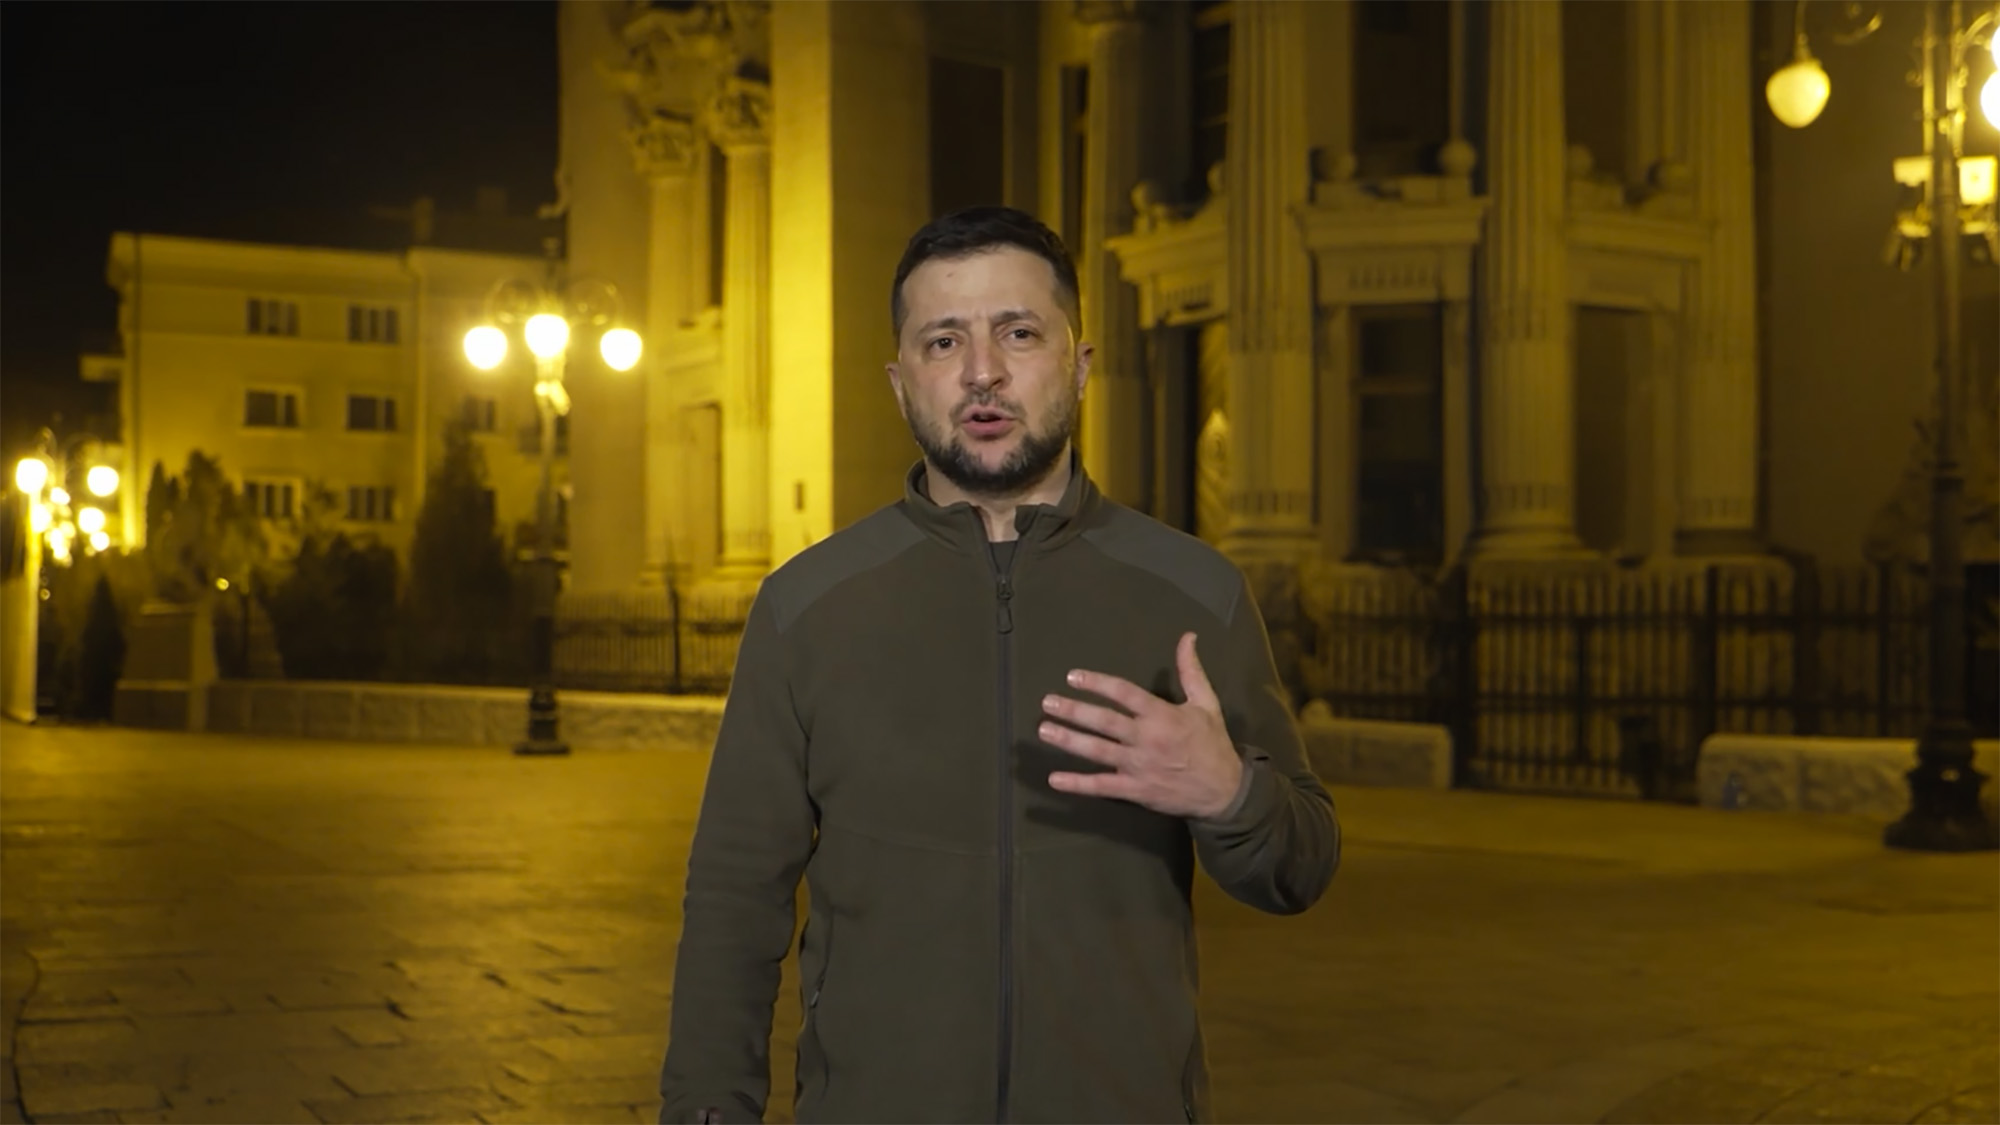 Ukrainian President Volodymyr Zelensky speaks during a video message early Saturday morning March 19.